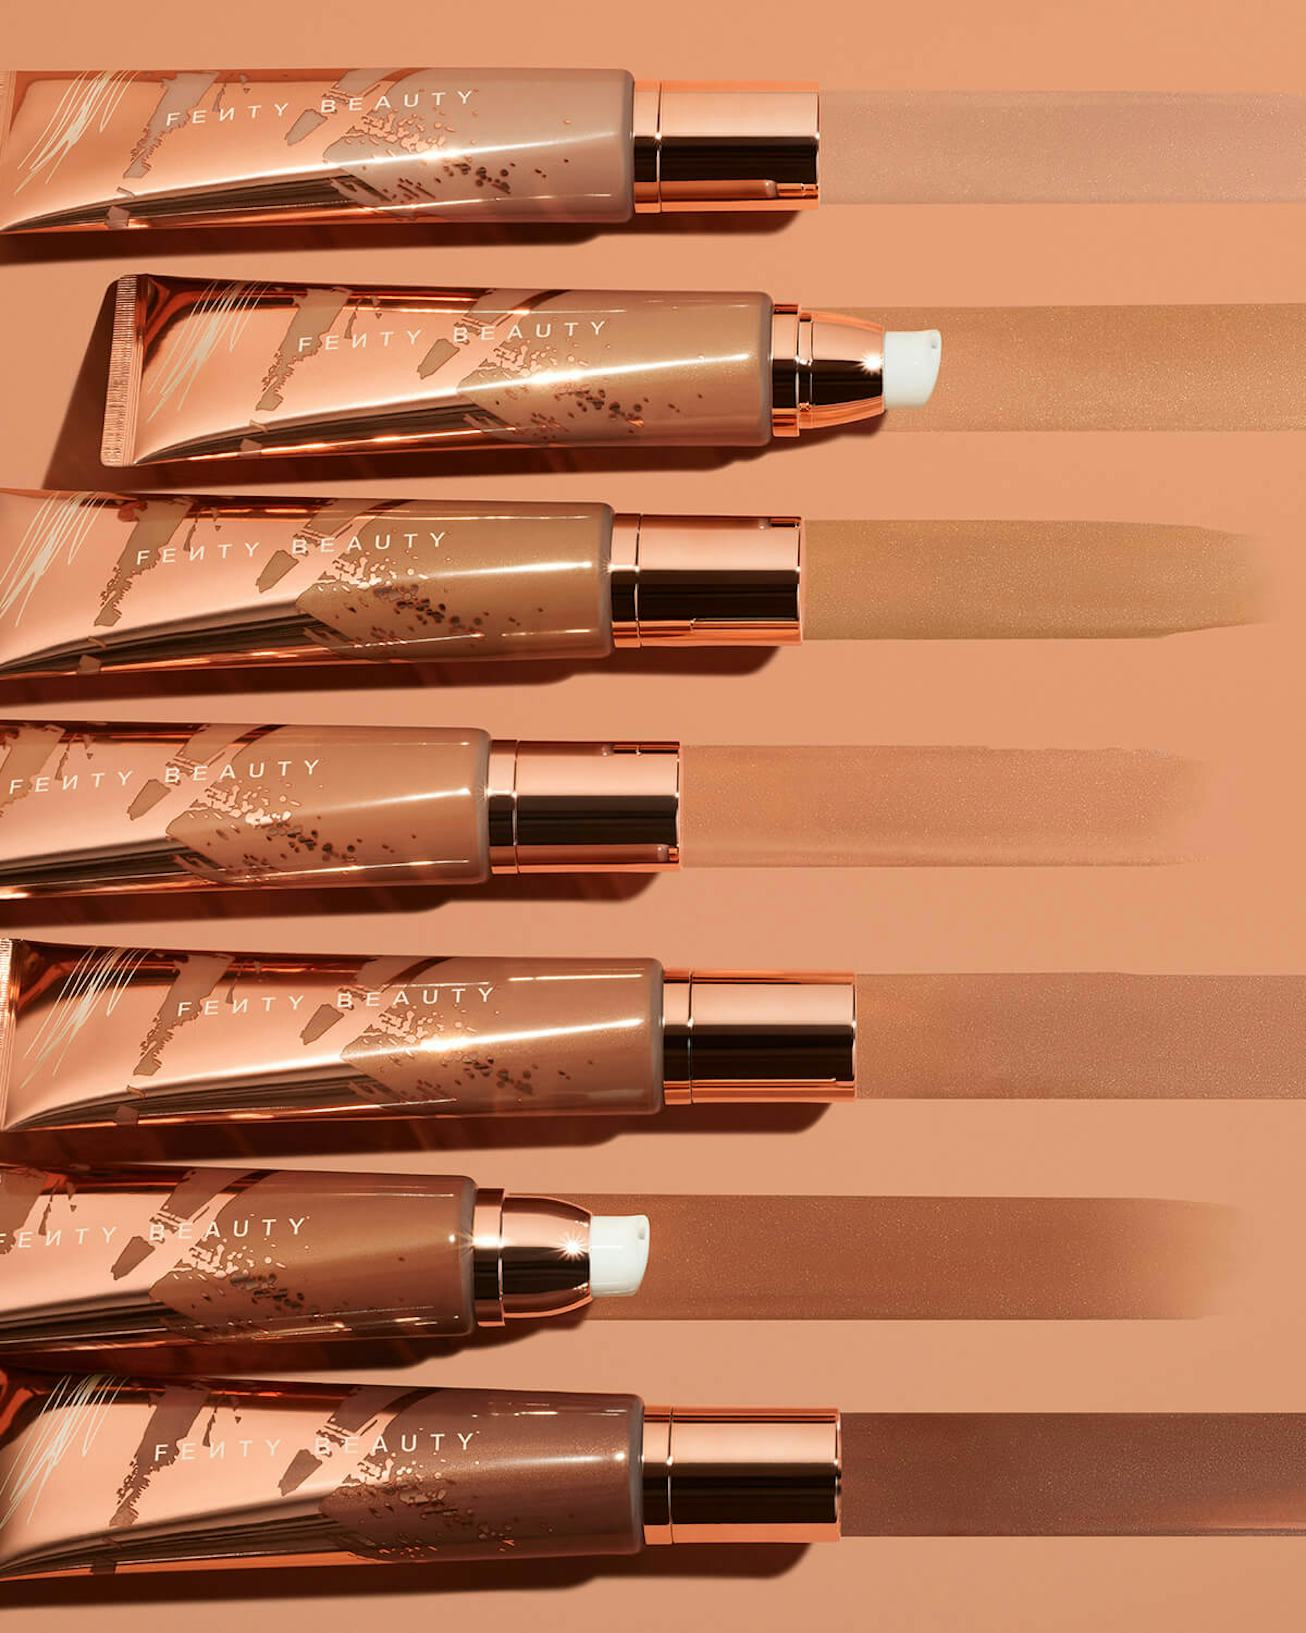 Fenty Beauty Body Sauce is among the best March 2021 New Makeup